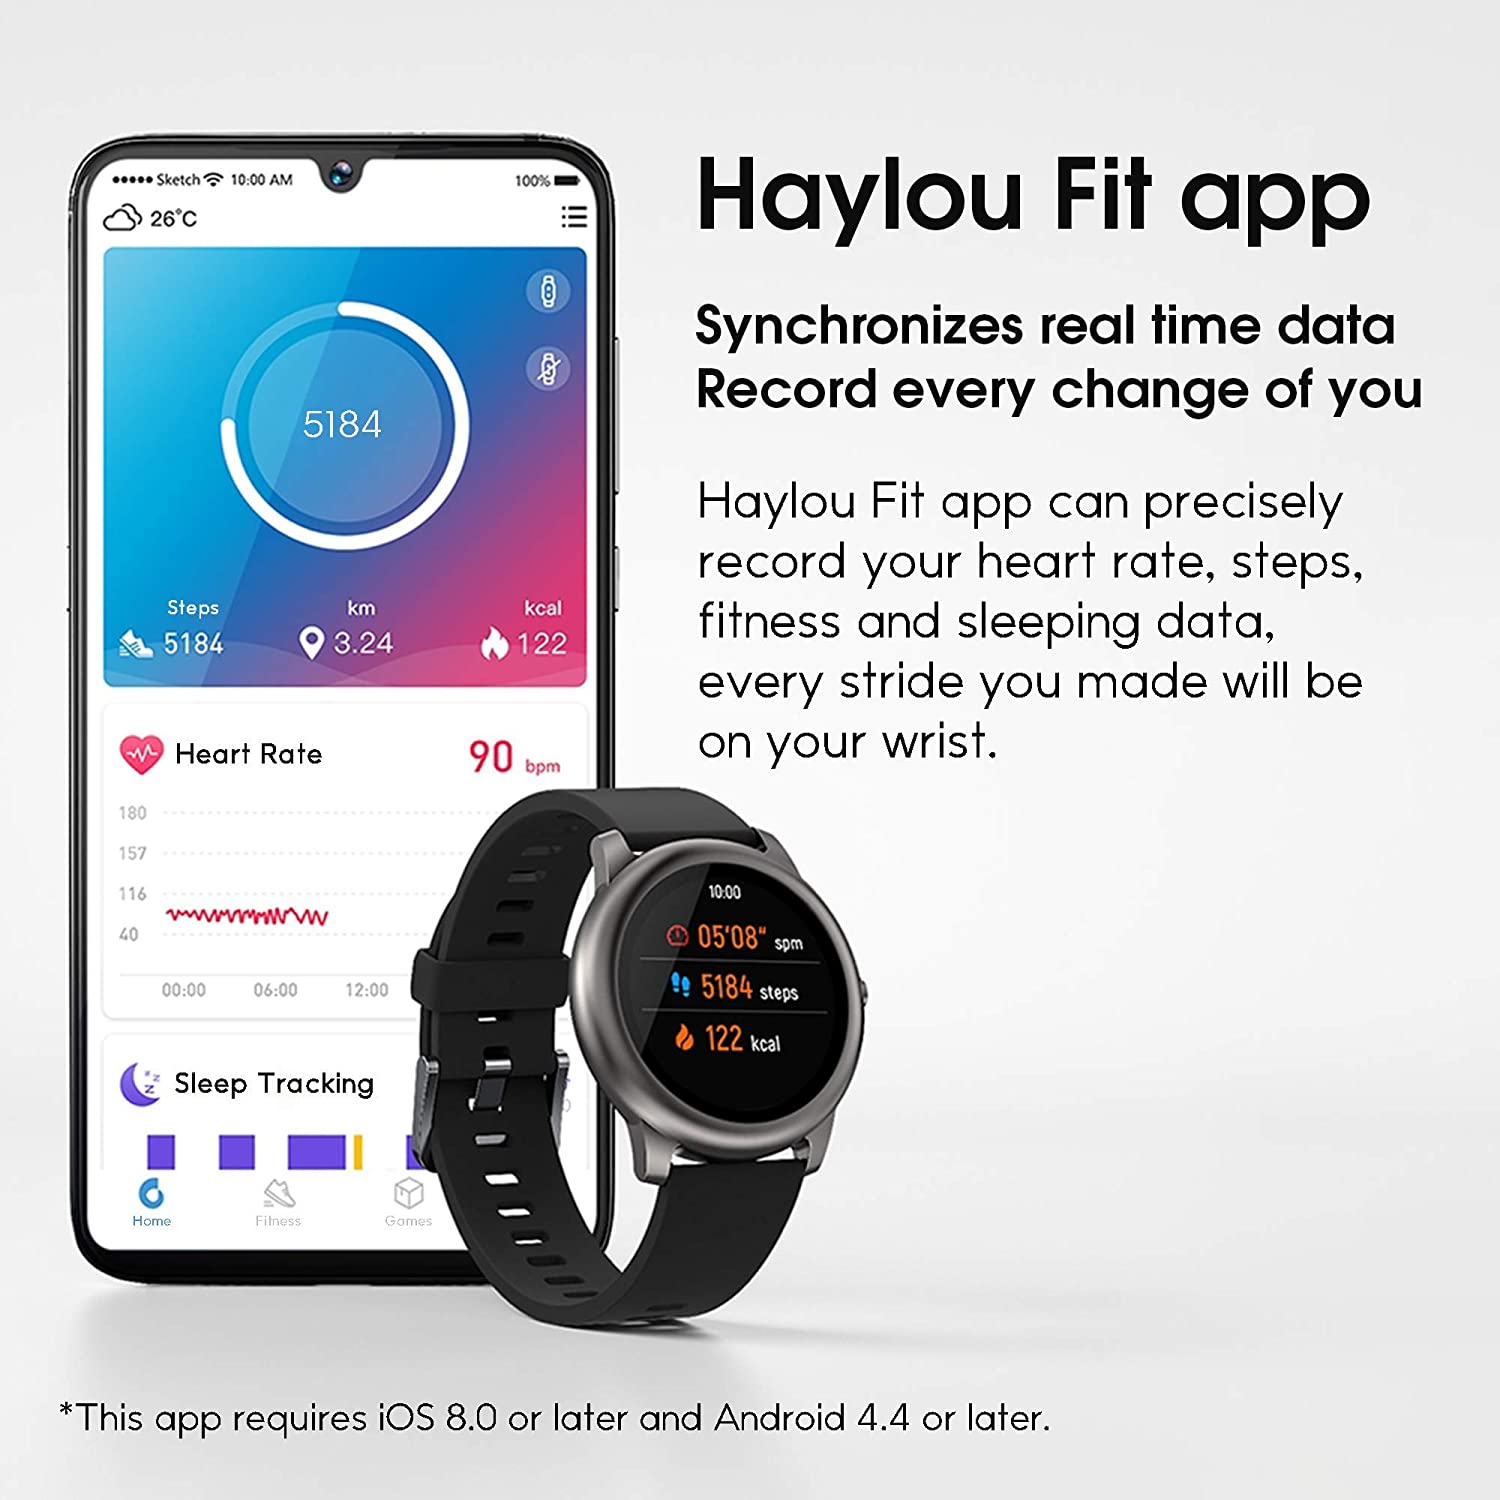 Haylou Solar LS05 Smart Watch Health and Fitness Tracker Up To 15 days - Black